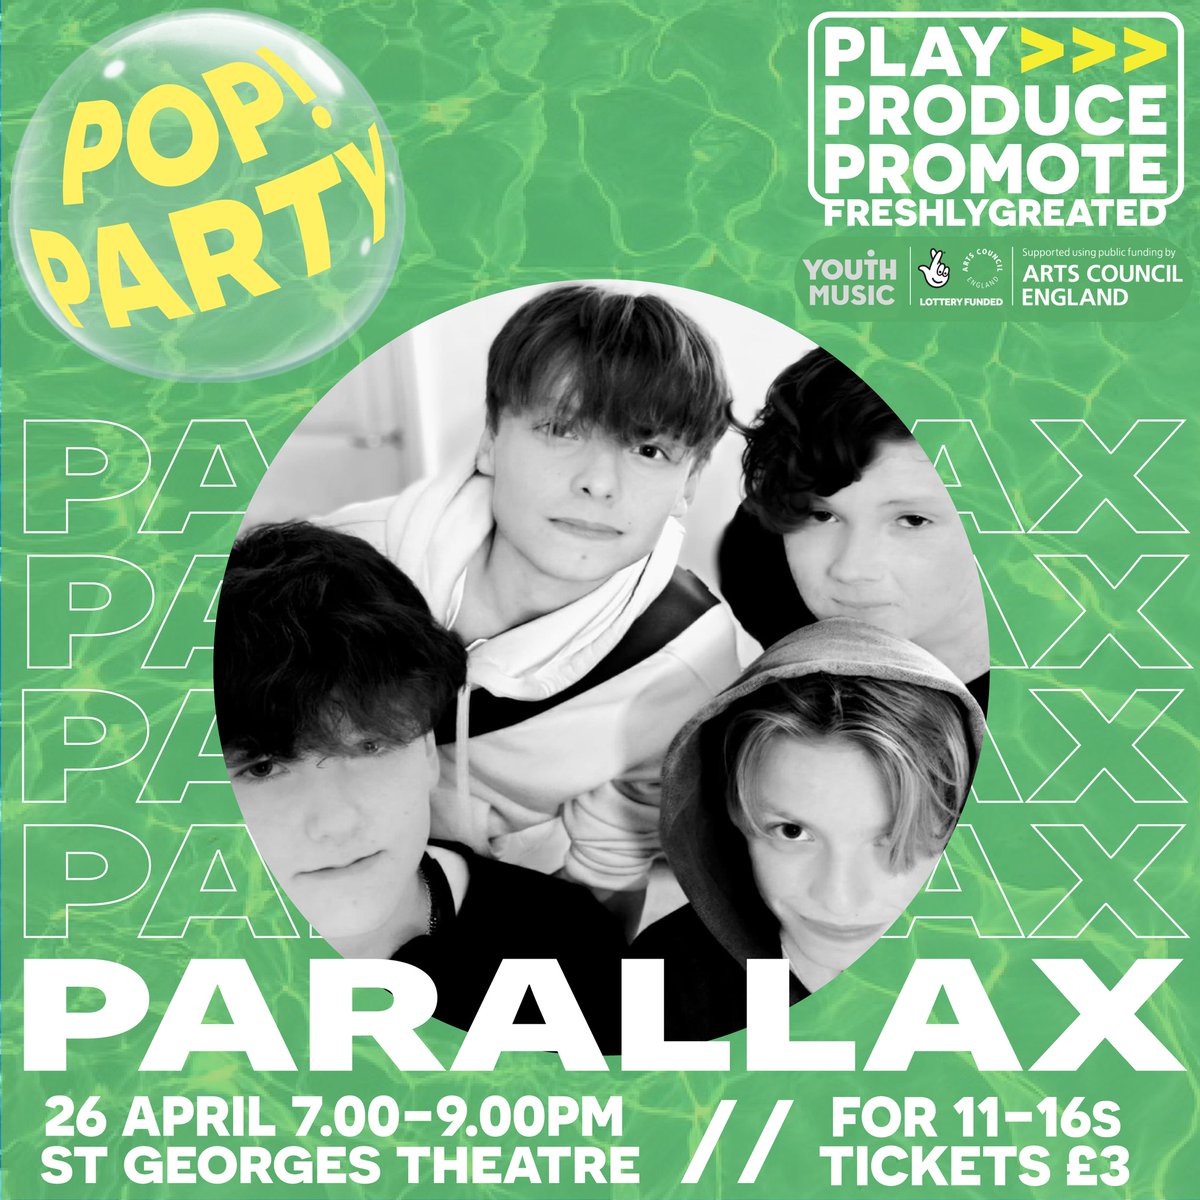 We've a great line-up for our POP! Party on Friday 26th April. Meet Parallax - a brand new teen indie-rock band who promise to bring their great vibes and explosive energy to the stage with some absolute bangers! 11 to 16? Book now, just £3 bit.ly/49lKcy7